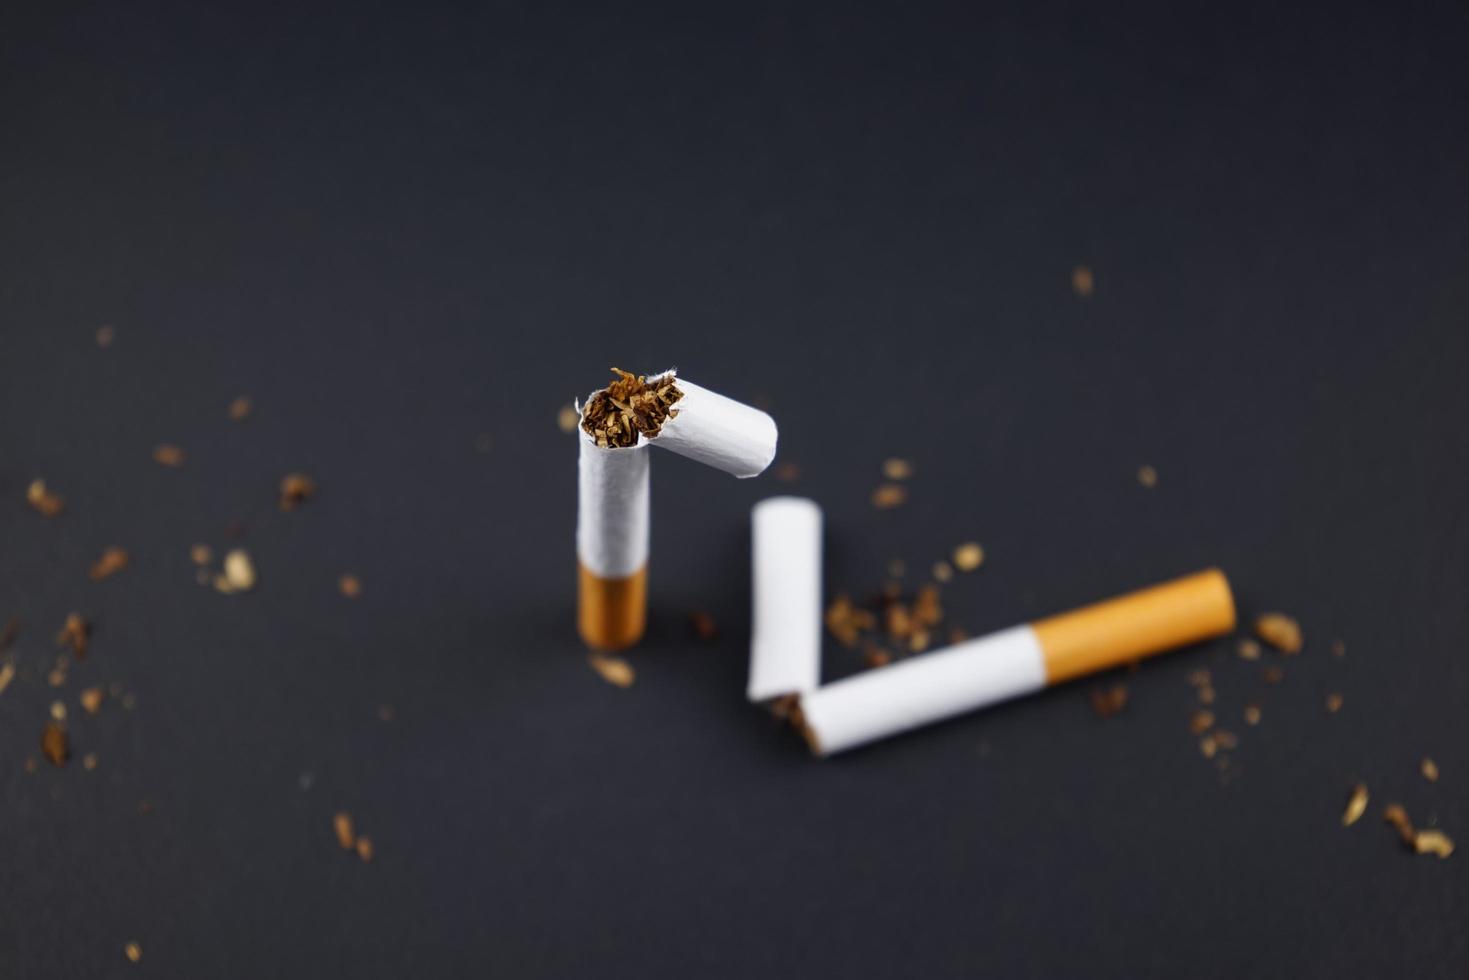 Breaking destroying cigarettes smoking tobacco flat lay on black grunge texture background for any smoking concepts like World No Tobacco Day or WNTD on 31 May or the dangers of using tobacco ideas photo